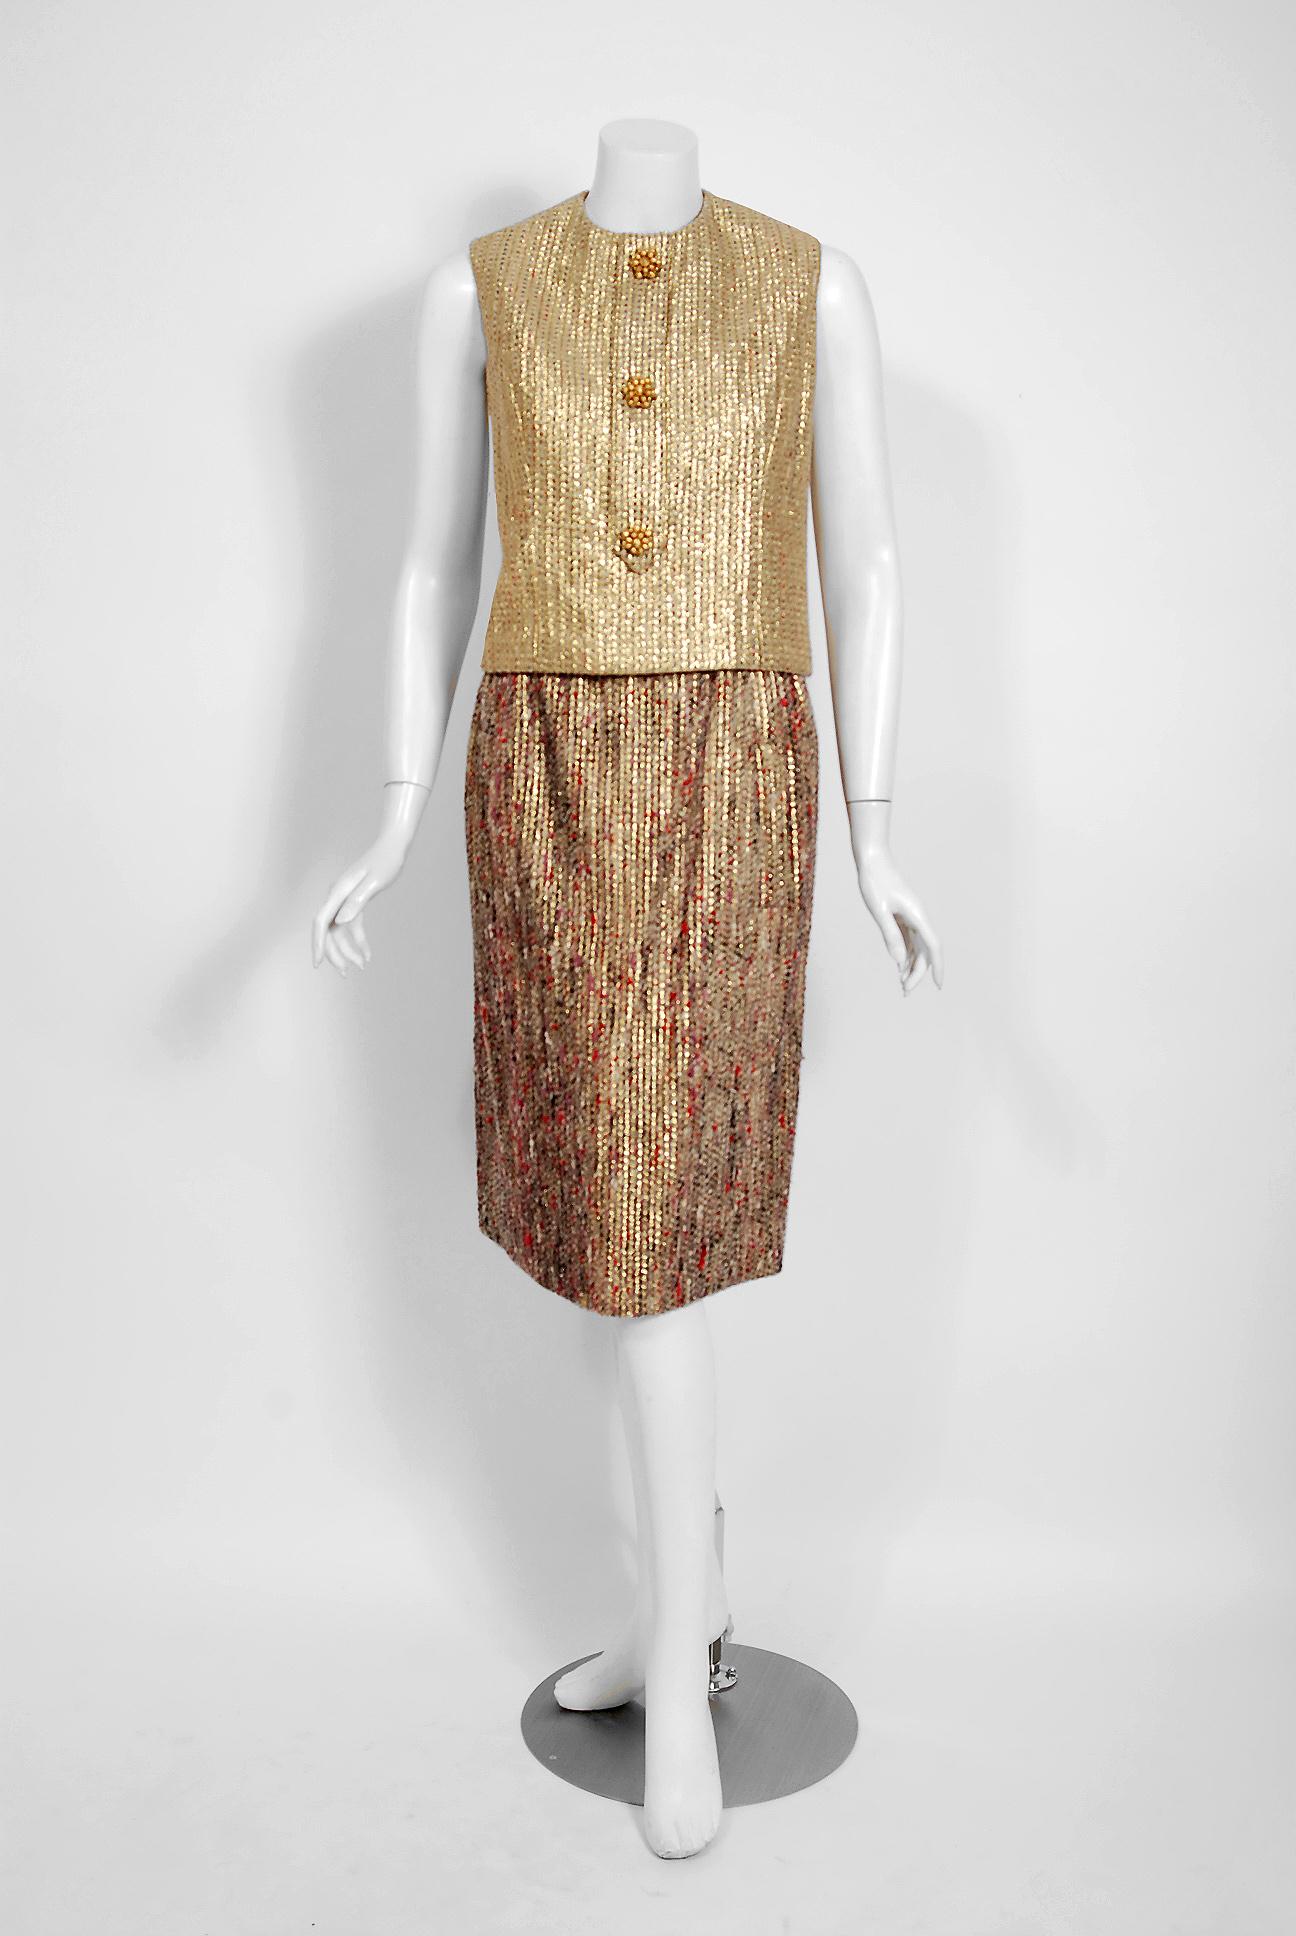 Brown Vintage 1963 Christian Dior Gold Lamé & Textured Wool Documented Dress Suit